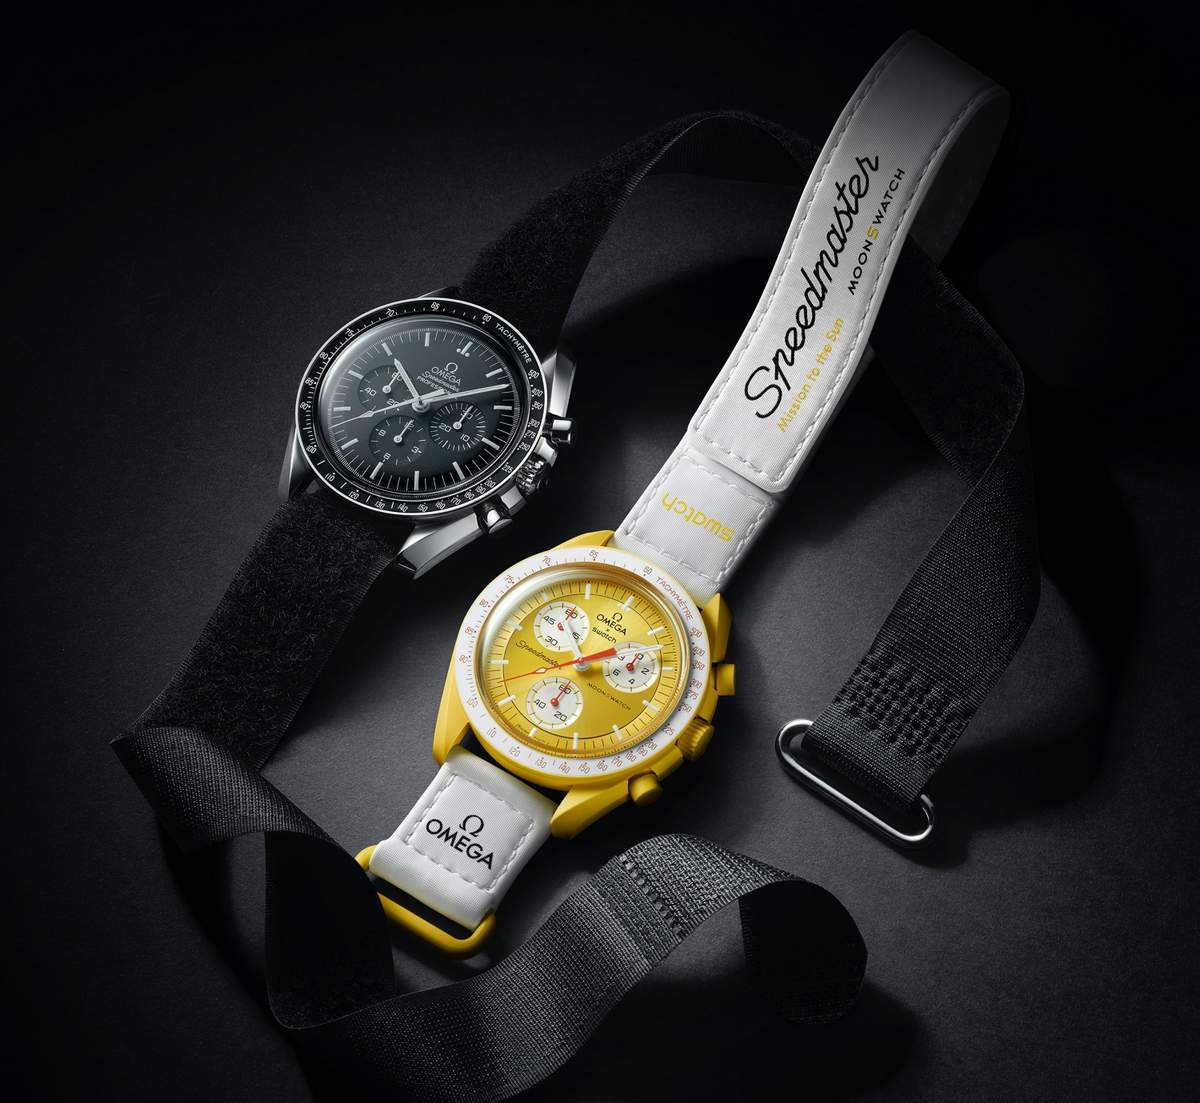 Omega x Swatch Speedmaster MoonSwatch Collection is too good to